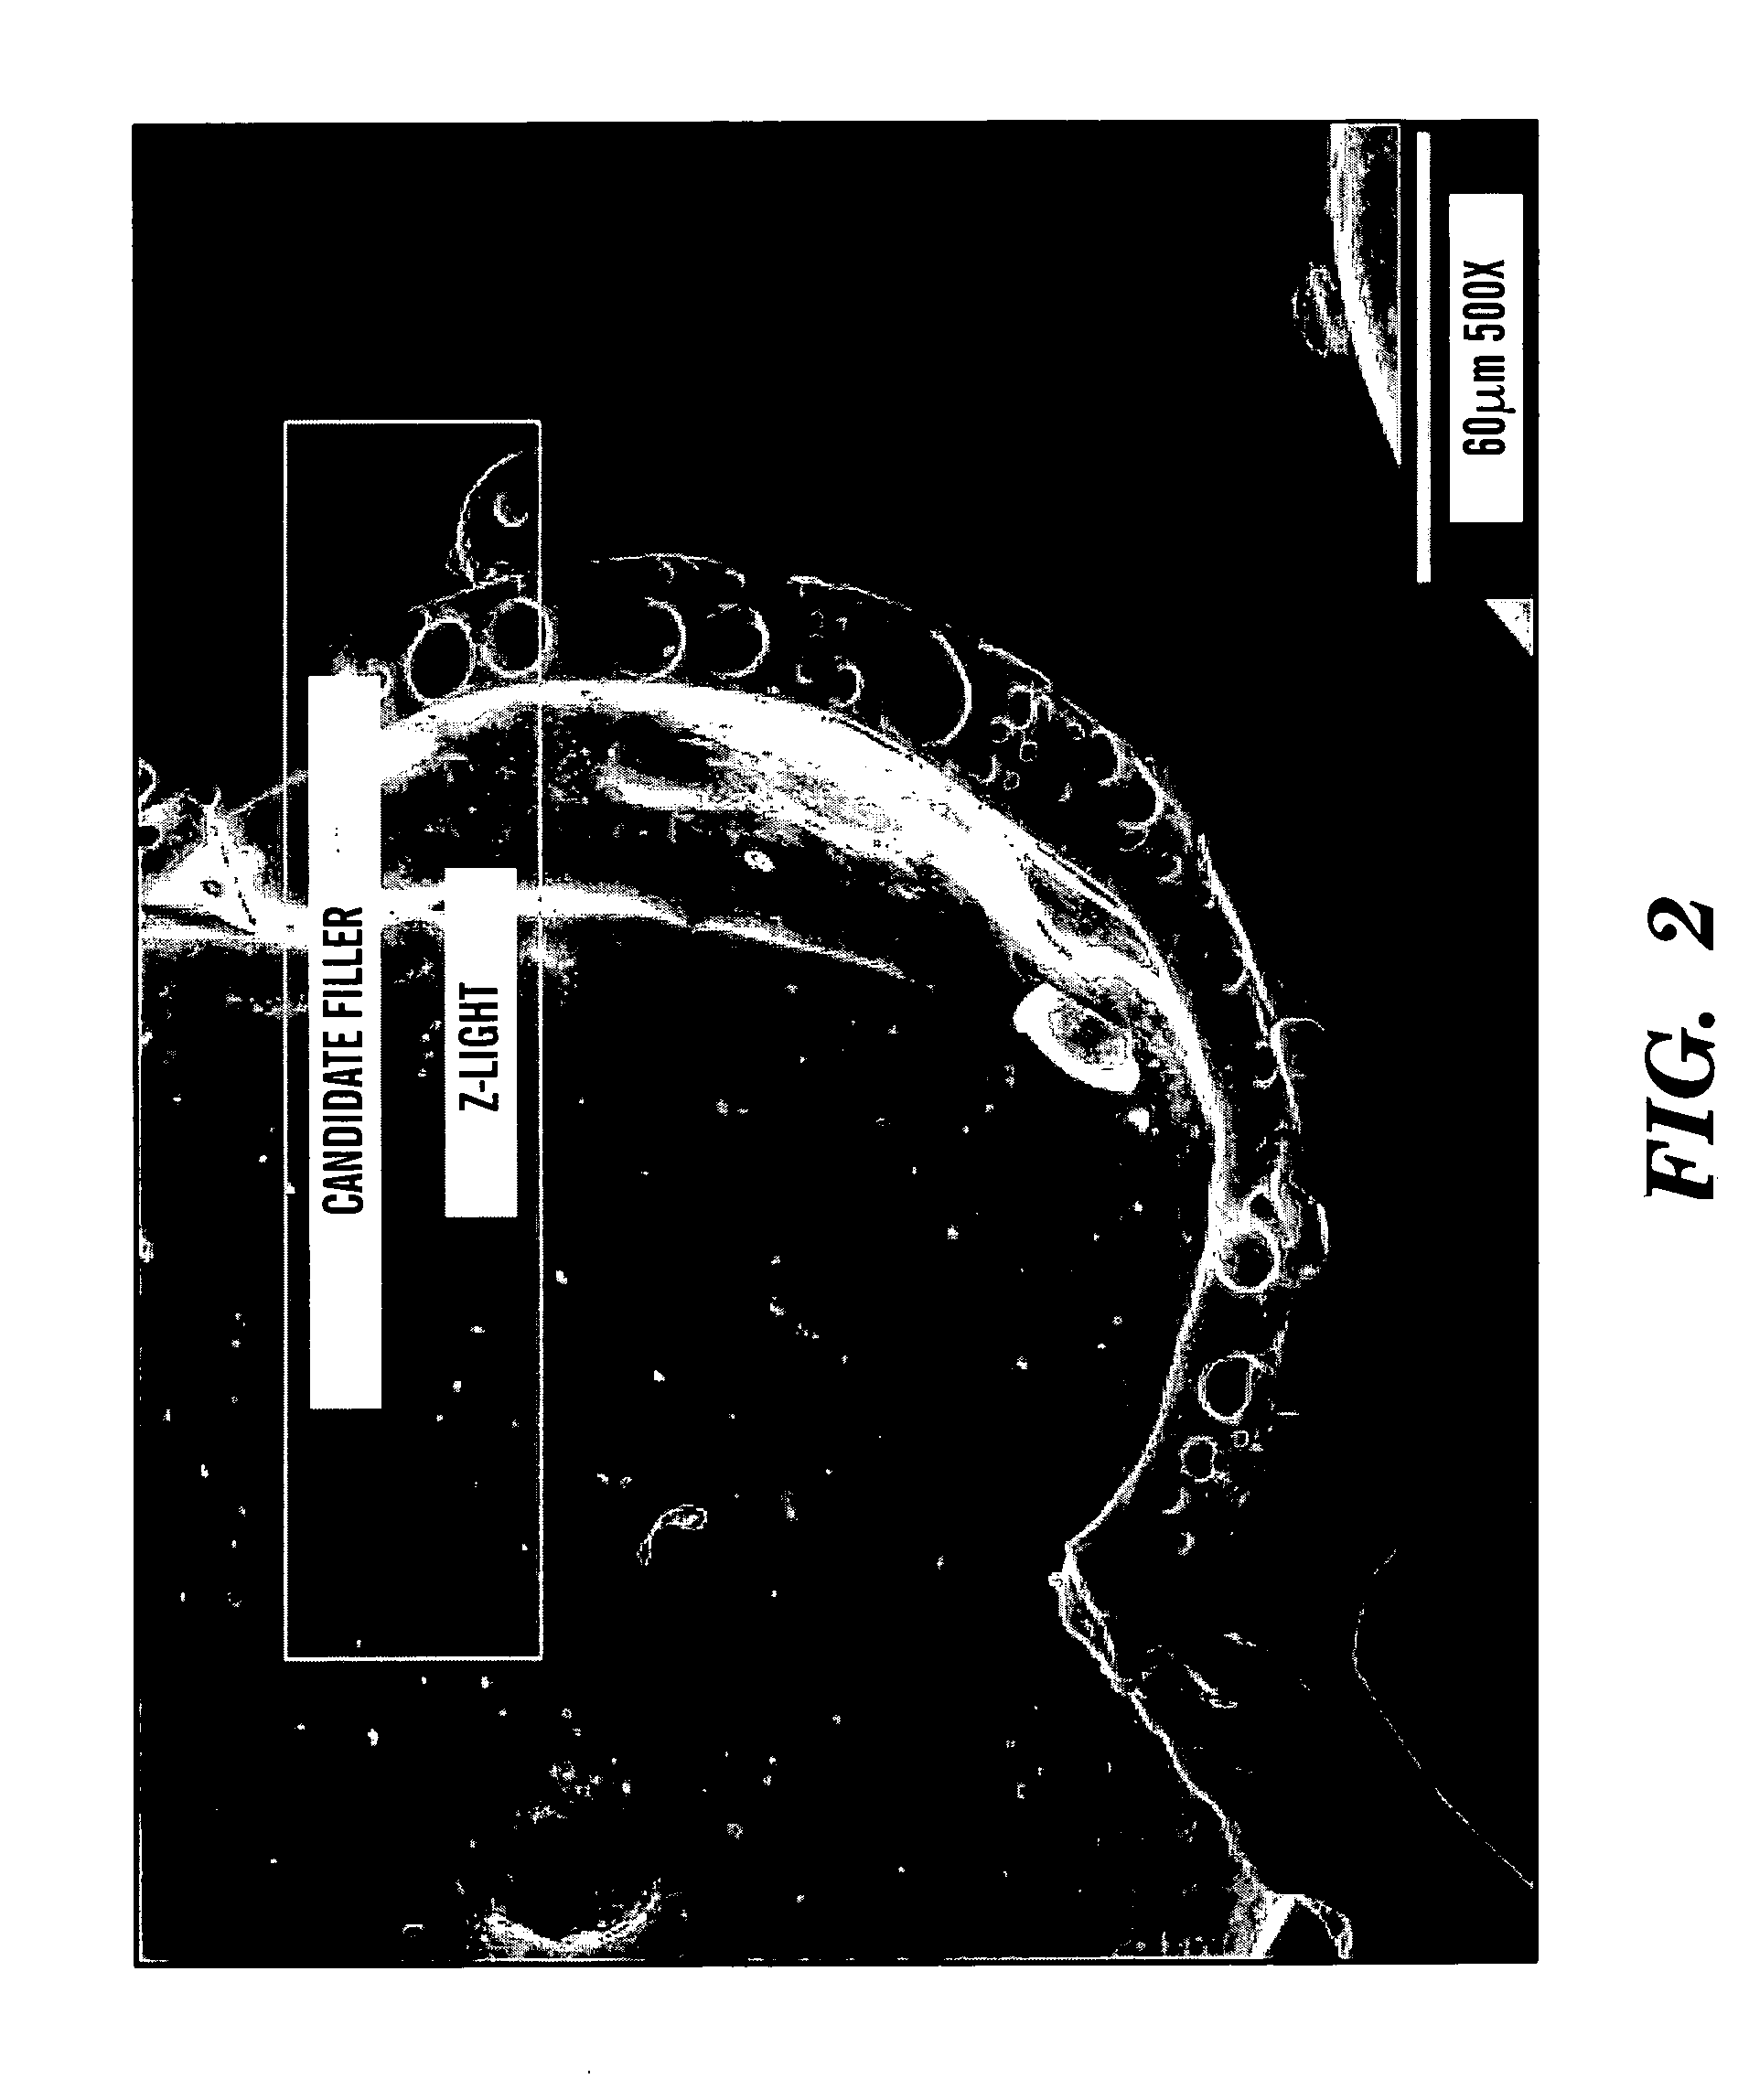 Process for enhancing material properties and materials so enhanced